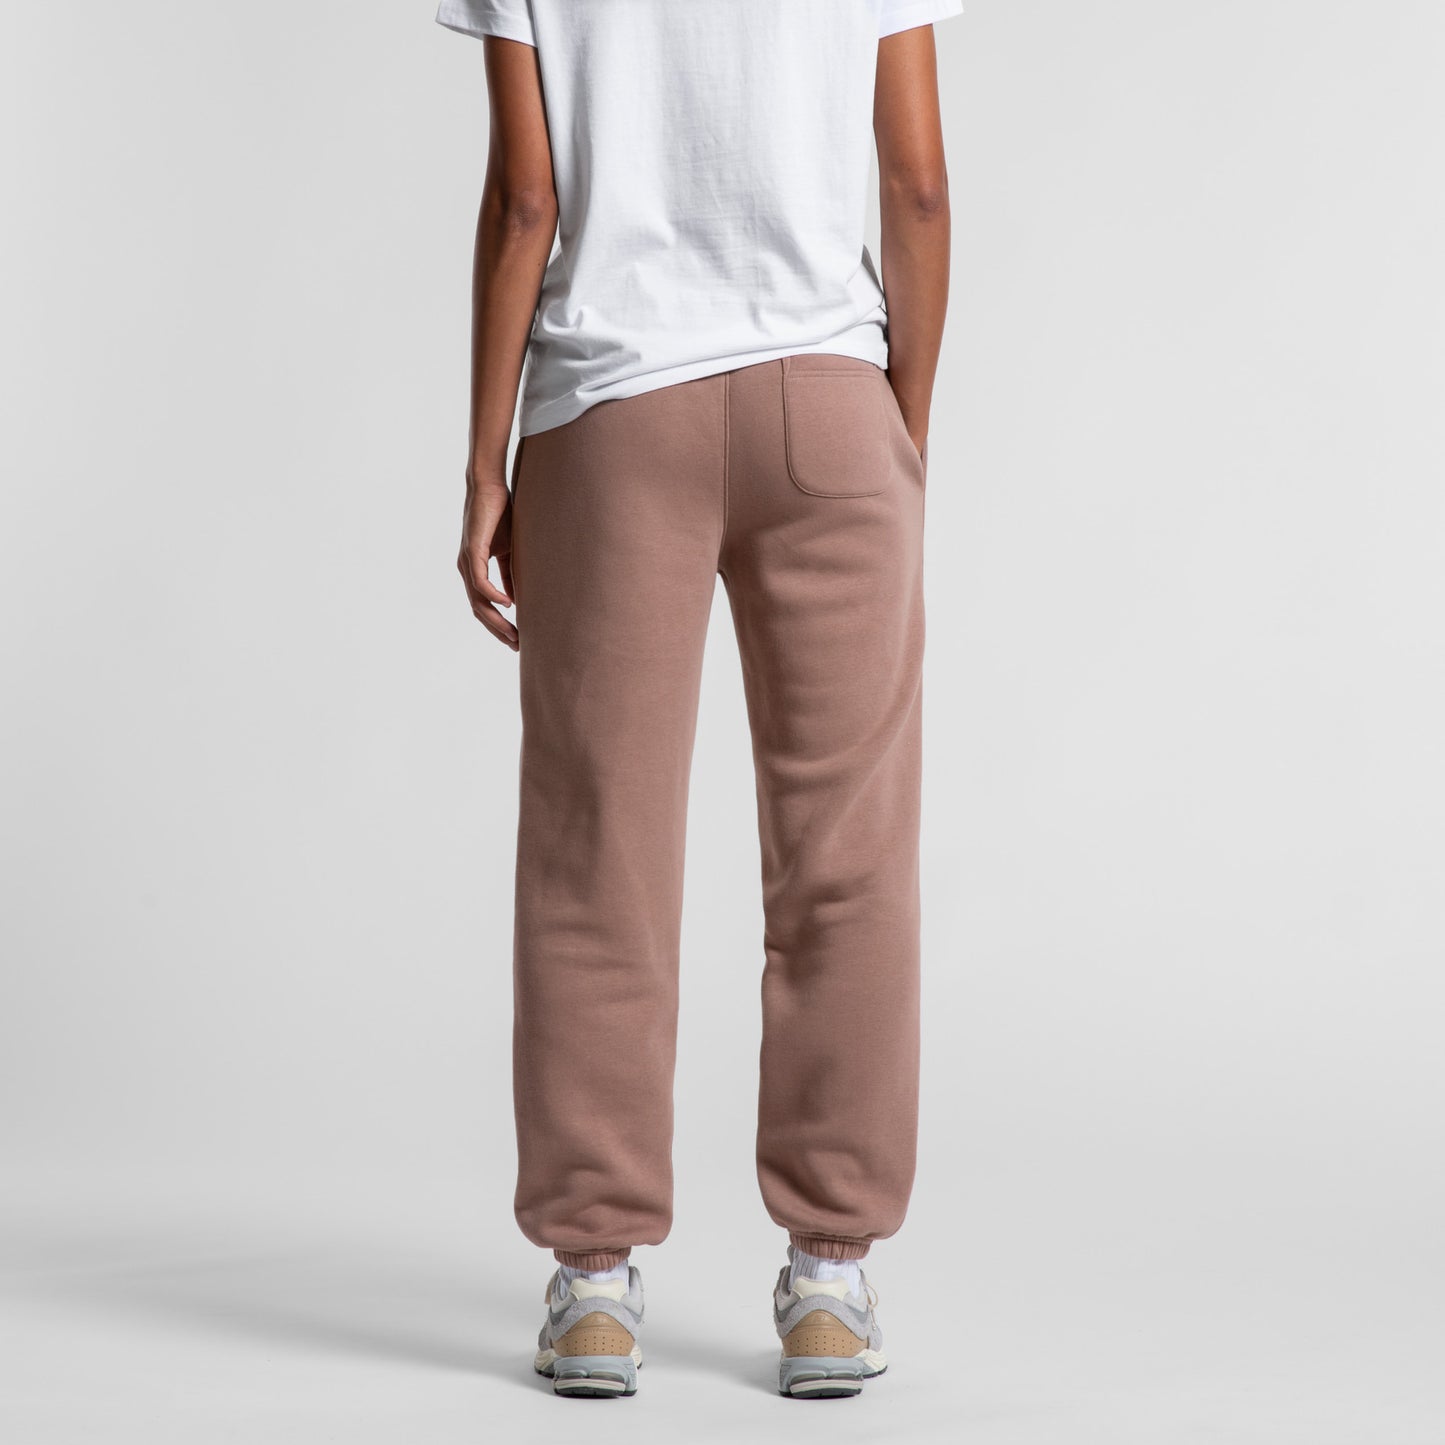 Ascolour Wo's Relax Track Pants (4932)